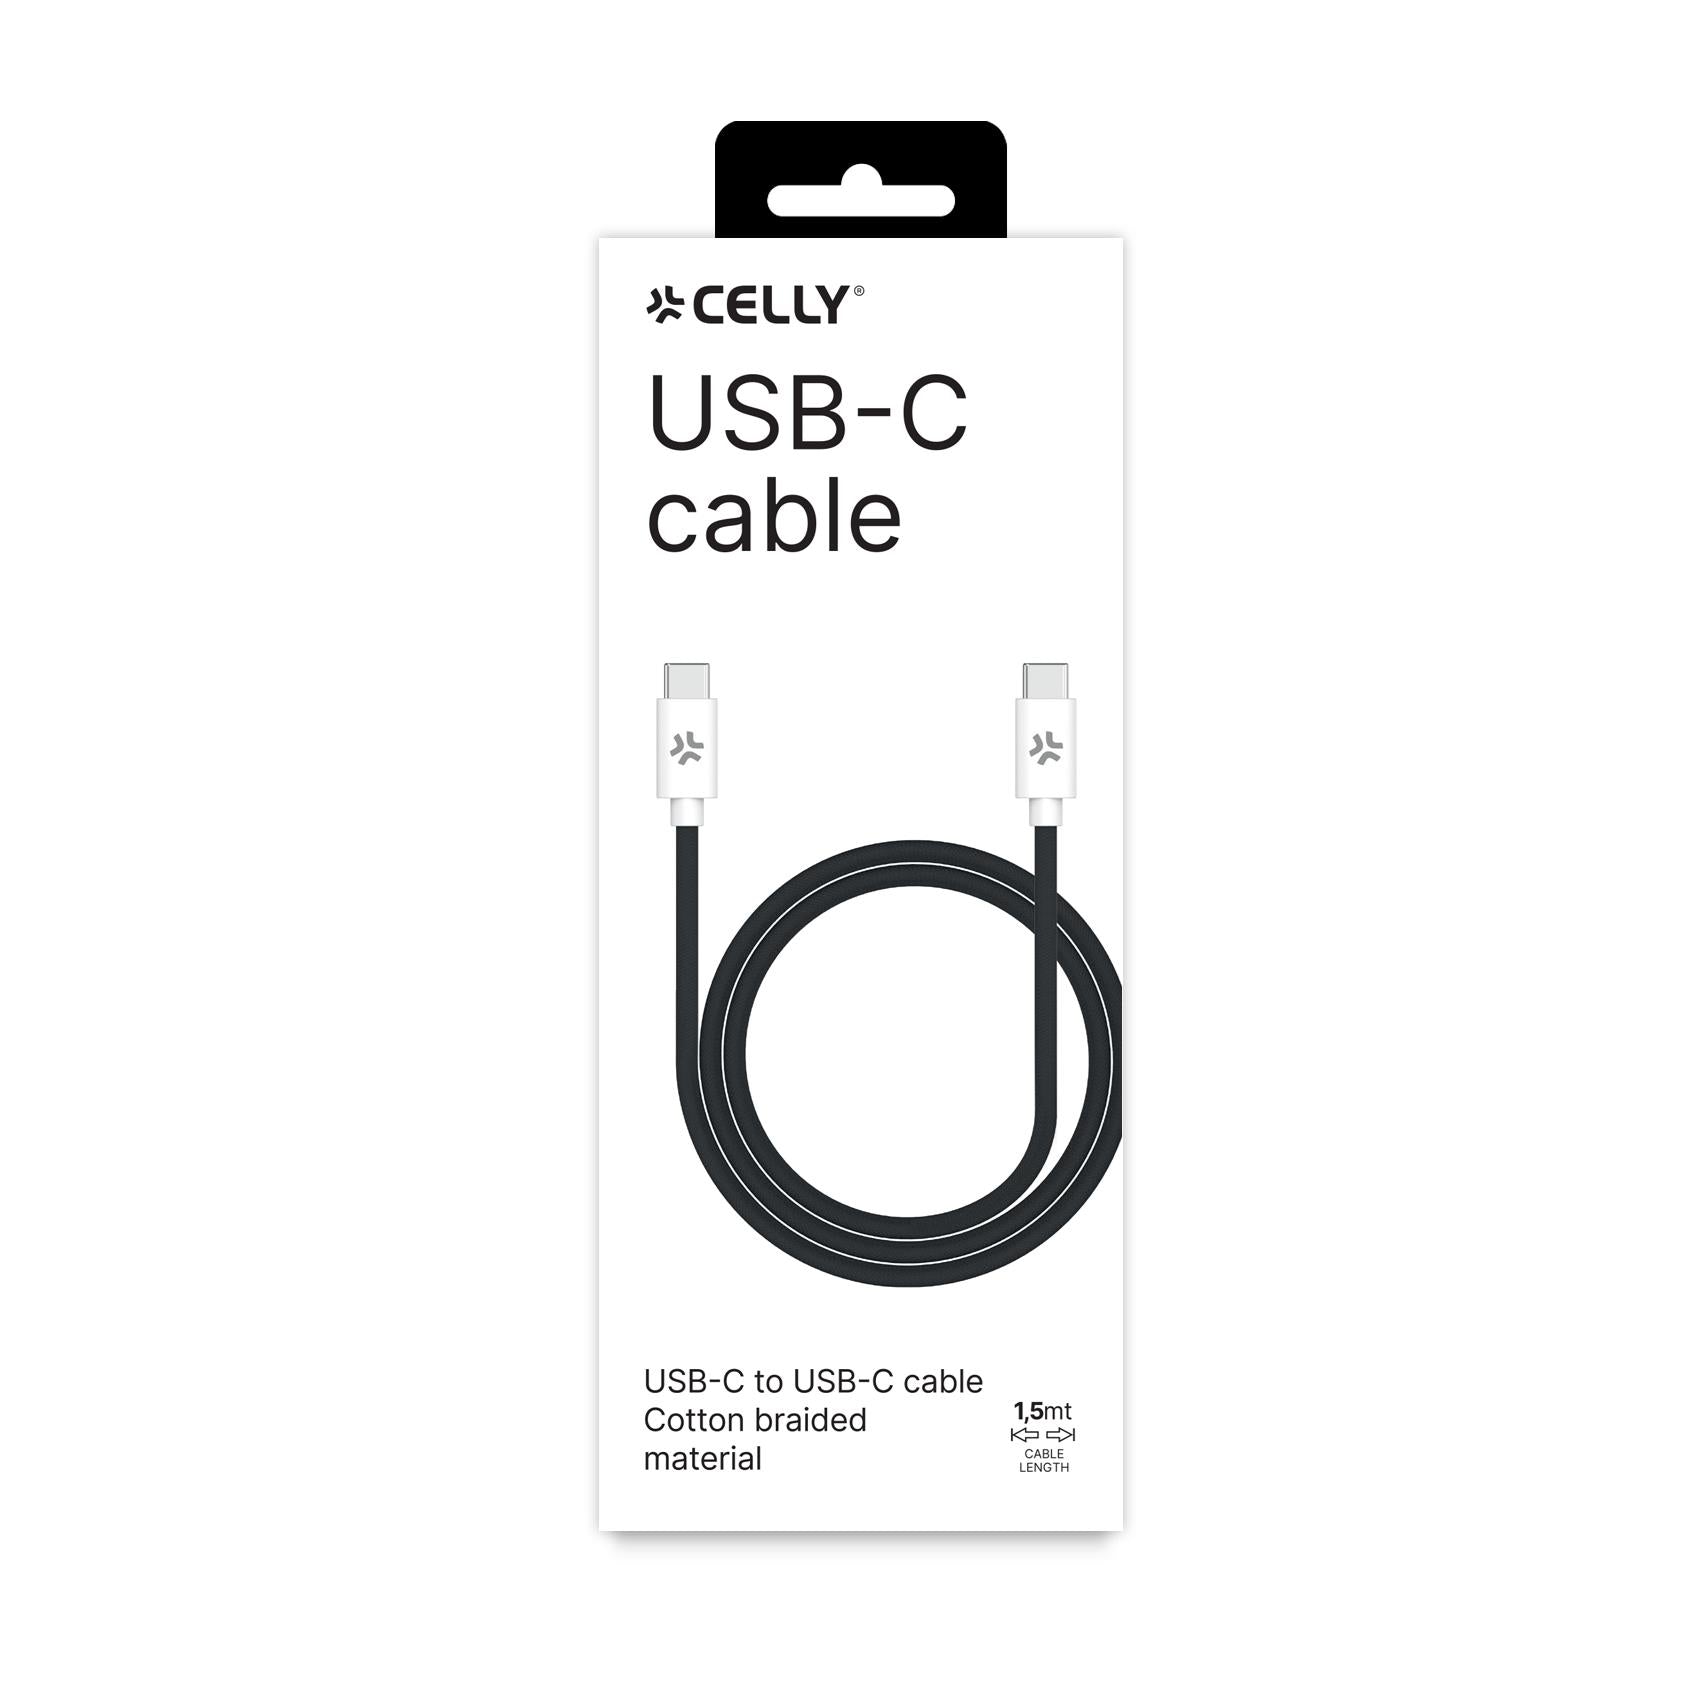 Celly USBCUSBCCOTT - USB-C to USB-C Cotton Braided Cable Black